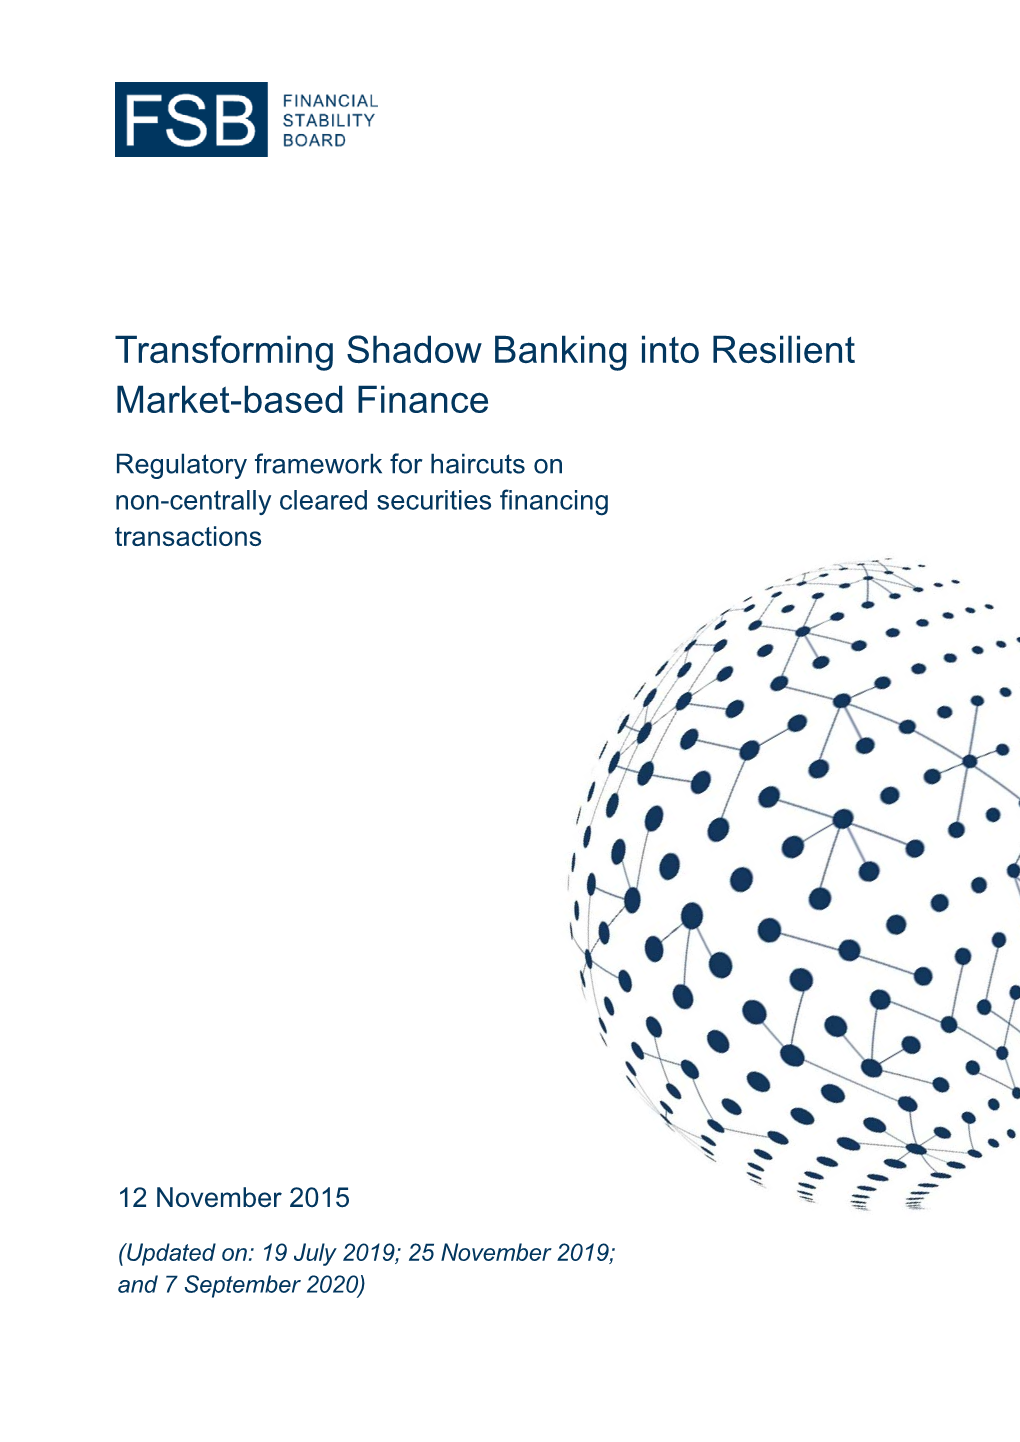 Transforming Shadow Banking Into Resilient Market-Based Finance